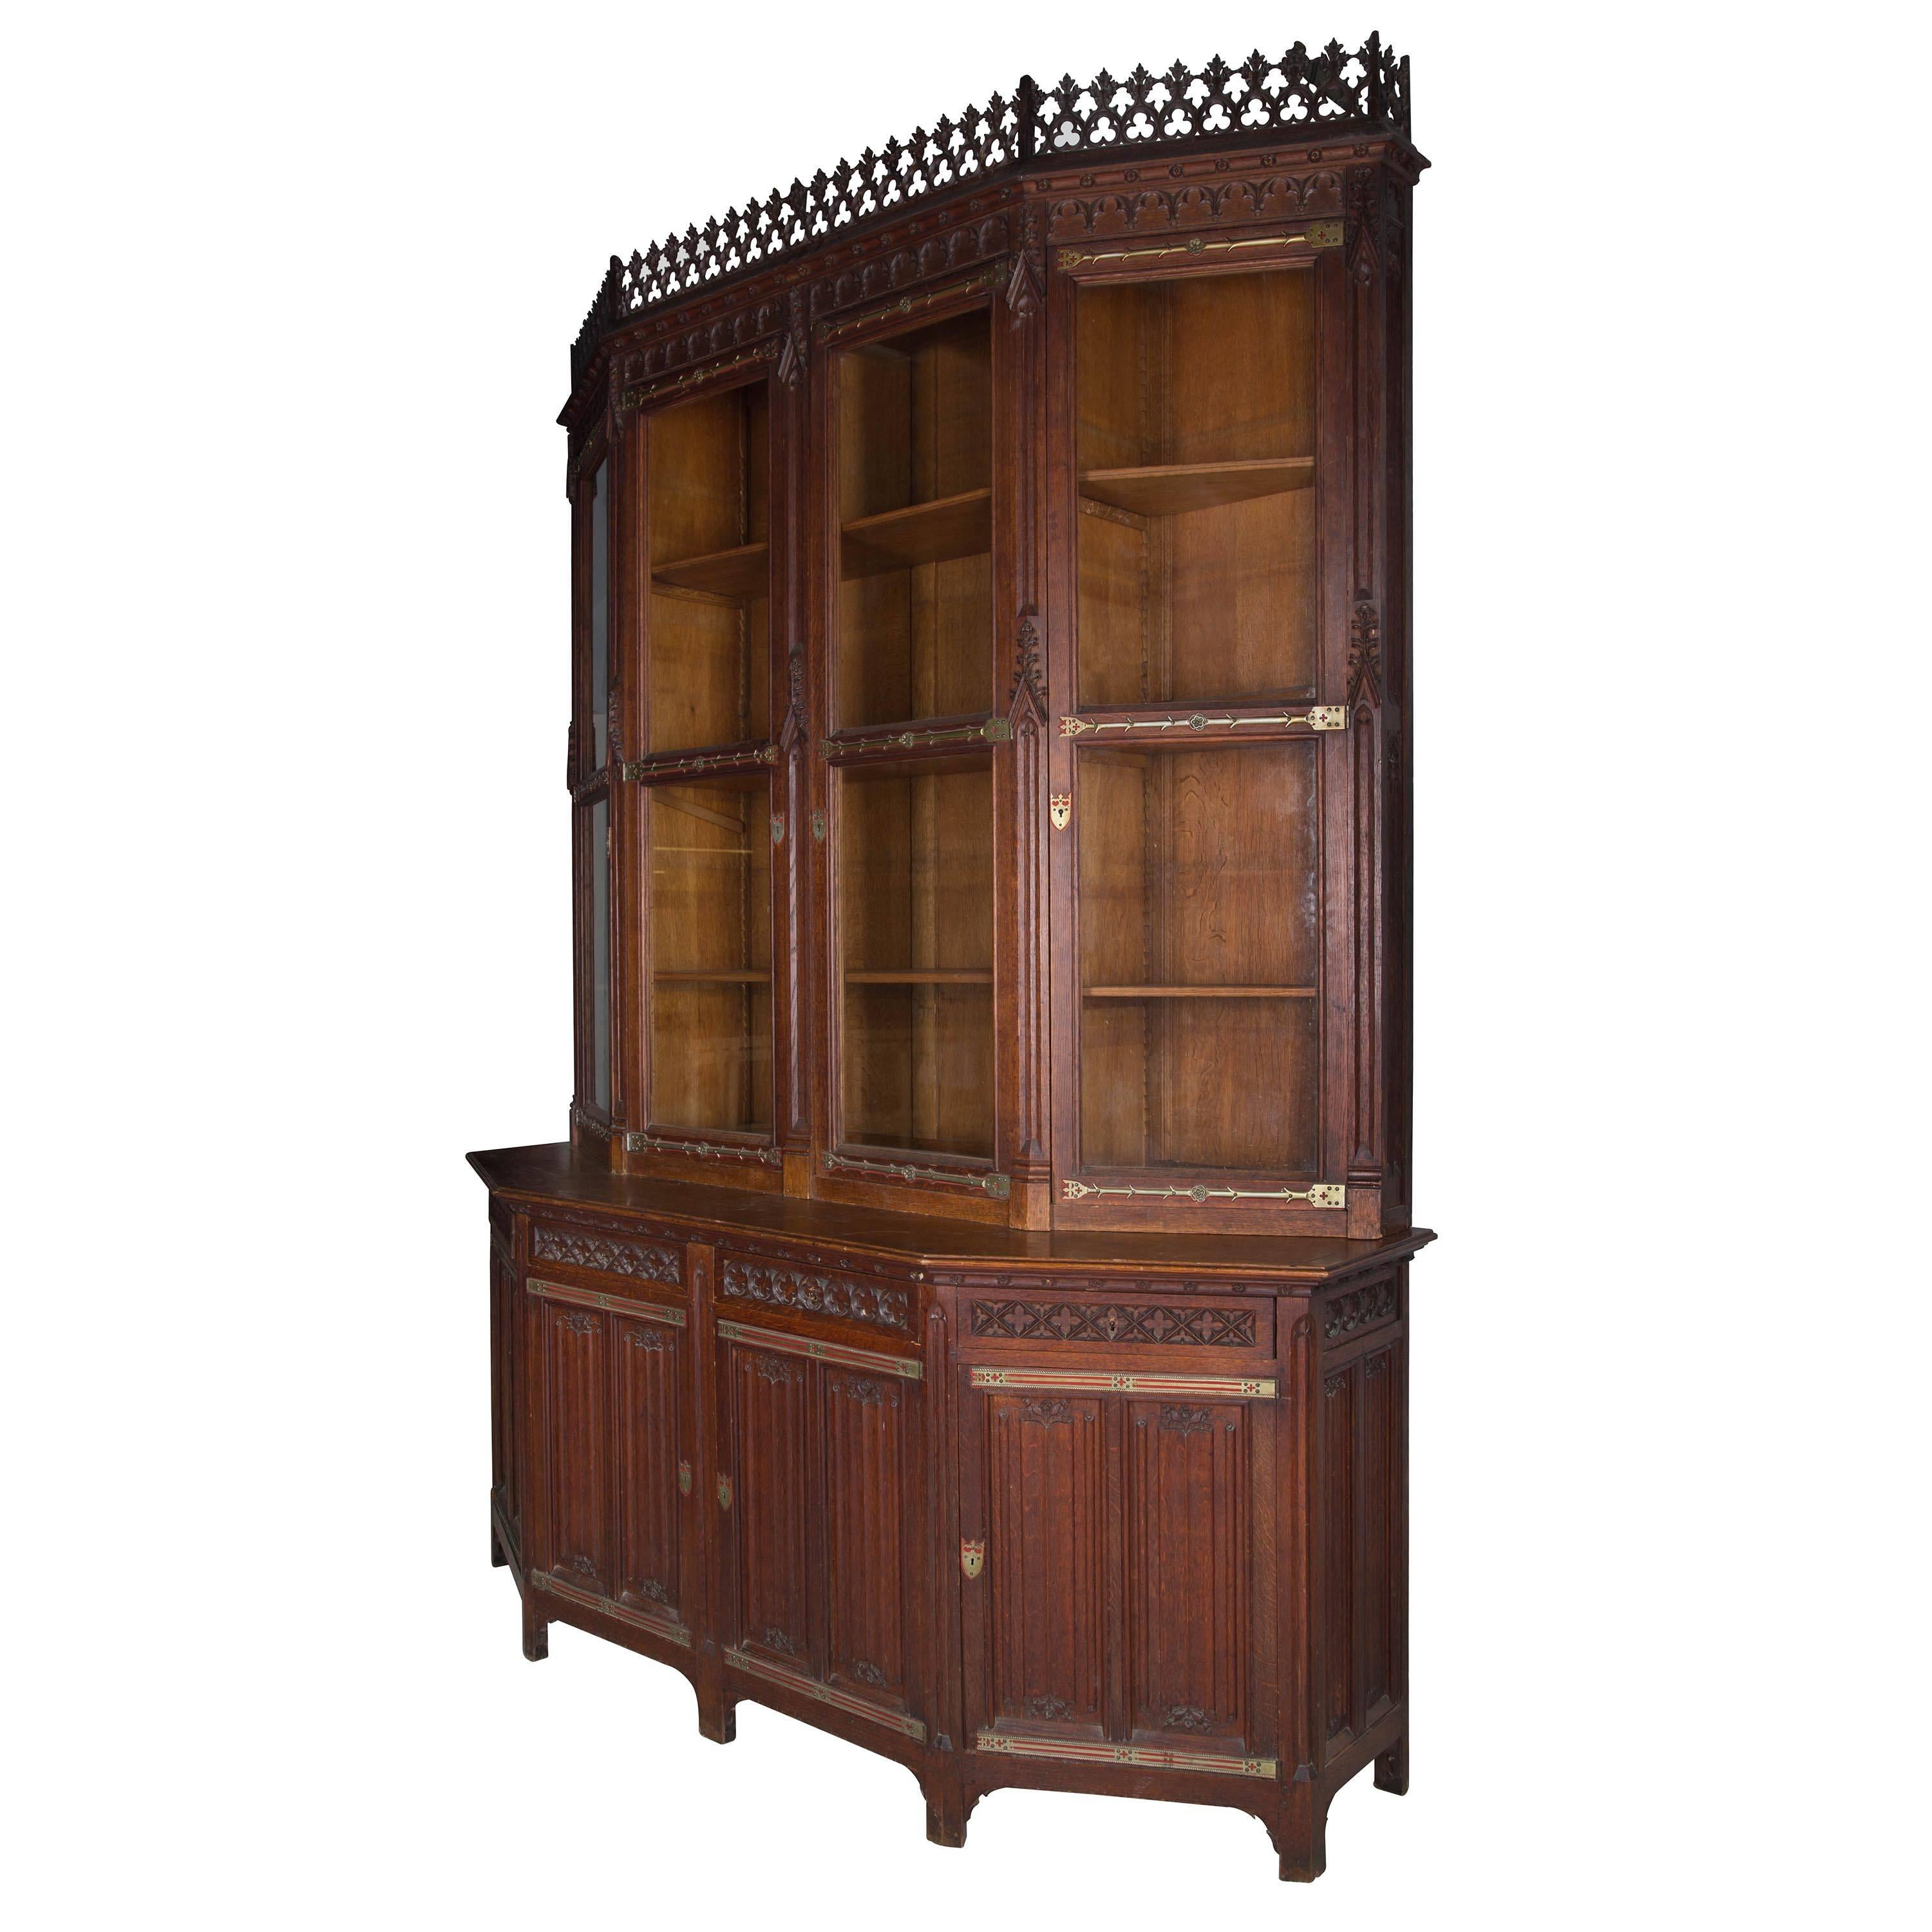 A Victorian carved oak Gothic Revival library bookcase, possibly after a design by Sir George Gilbert Scott, of canted form, the upper section fitted with four plain glazed doors above a base with four frieze drawers and blind cupboards below, the